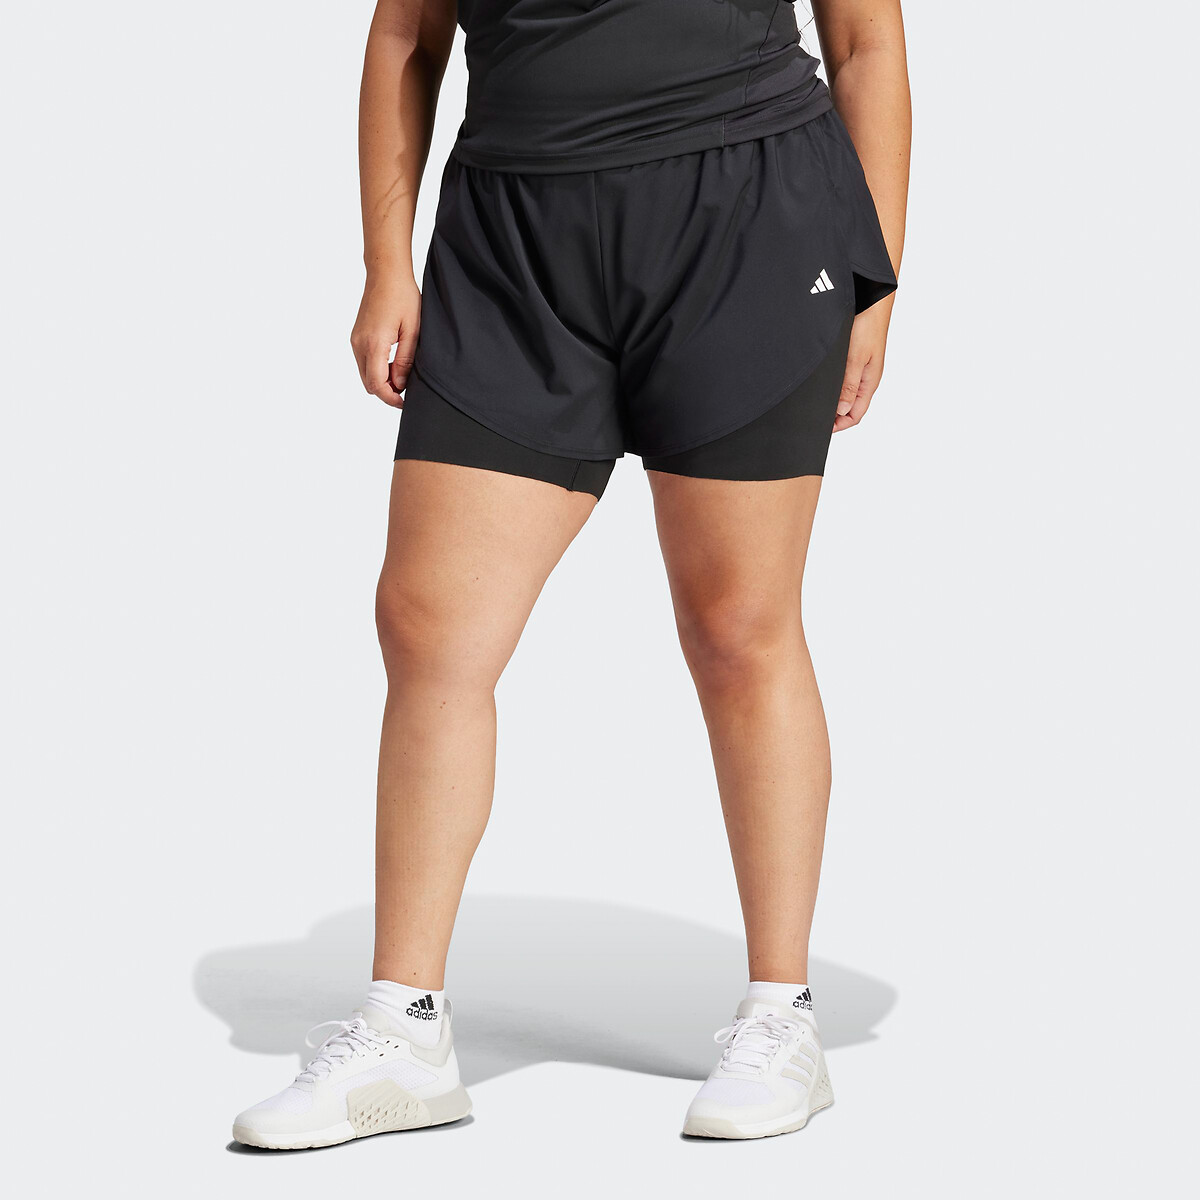 Adidas performance Short 2-in-1 Designed for Training